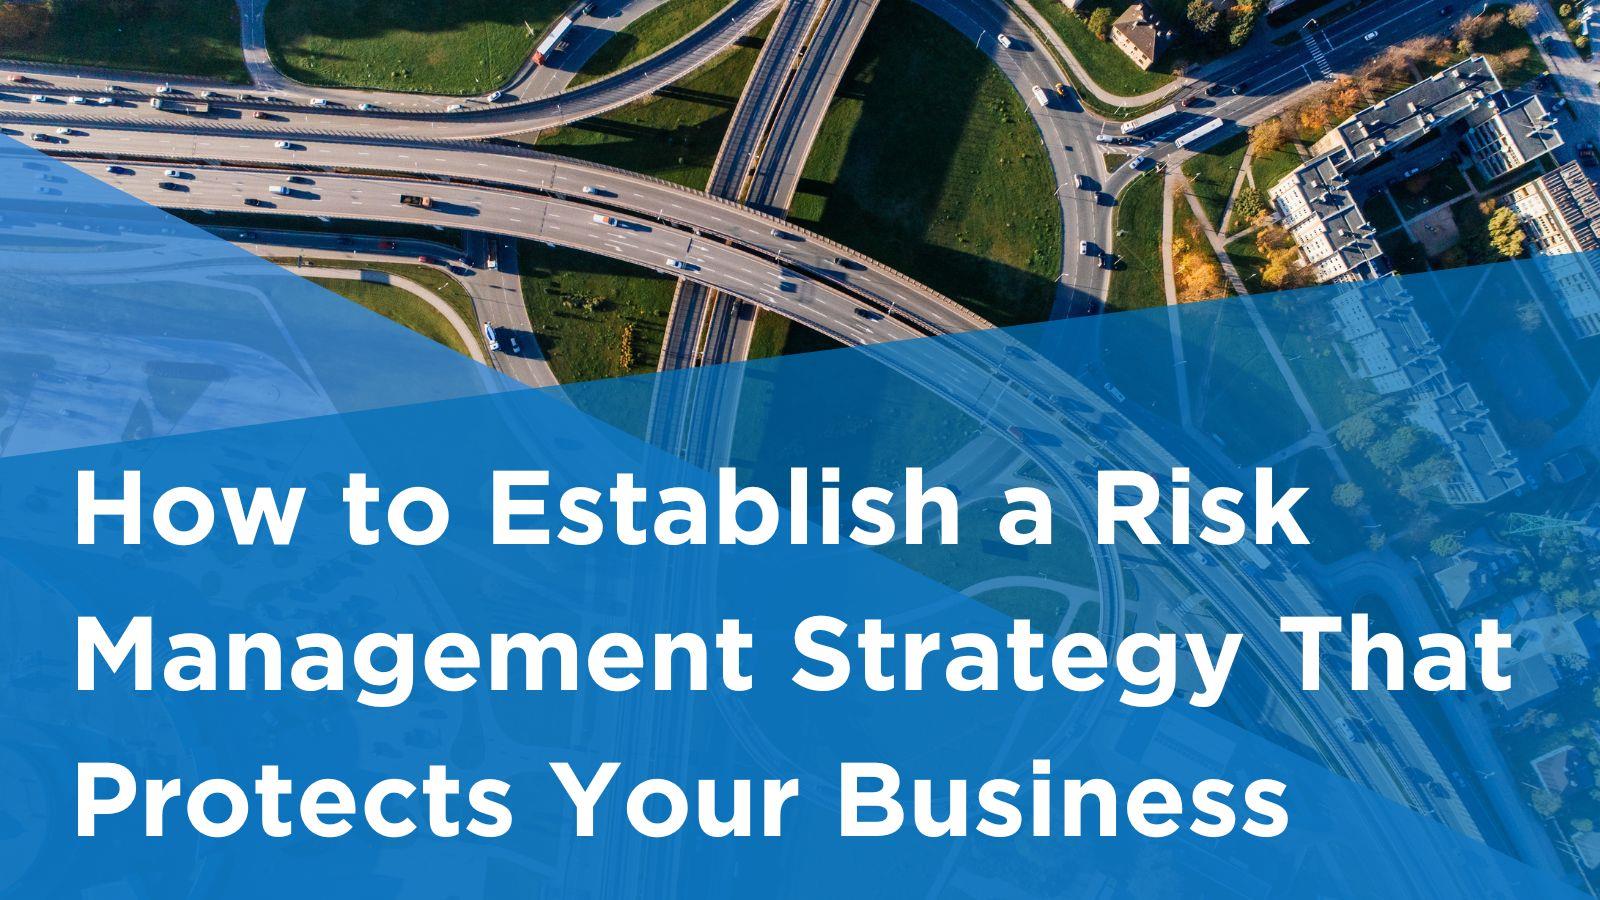 Image overlooking a highway with cars driving and the tops of building with text reading, "How to Establish a Risk Management Strategy That Protects Your Business".